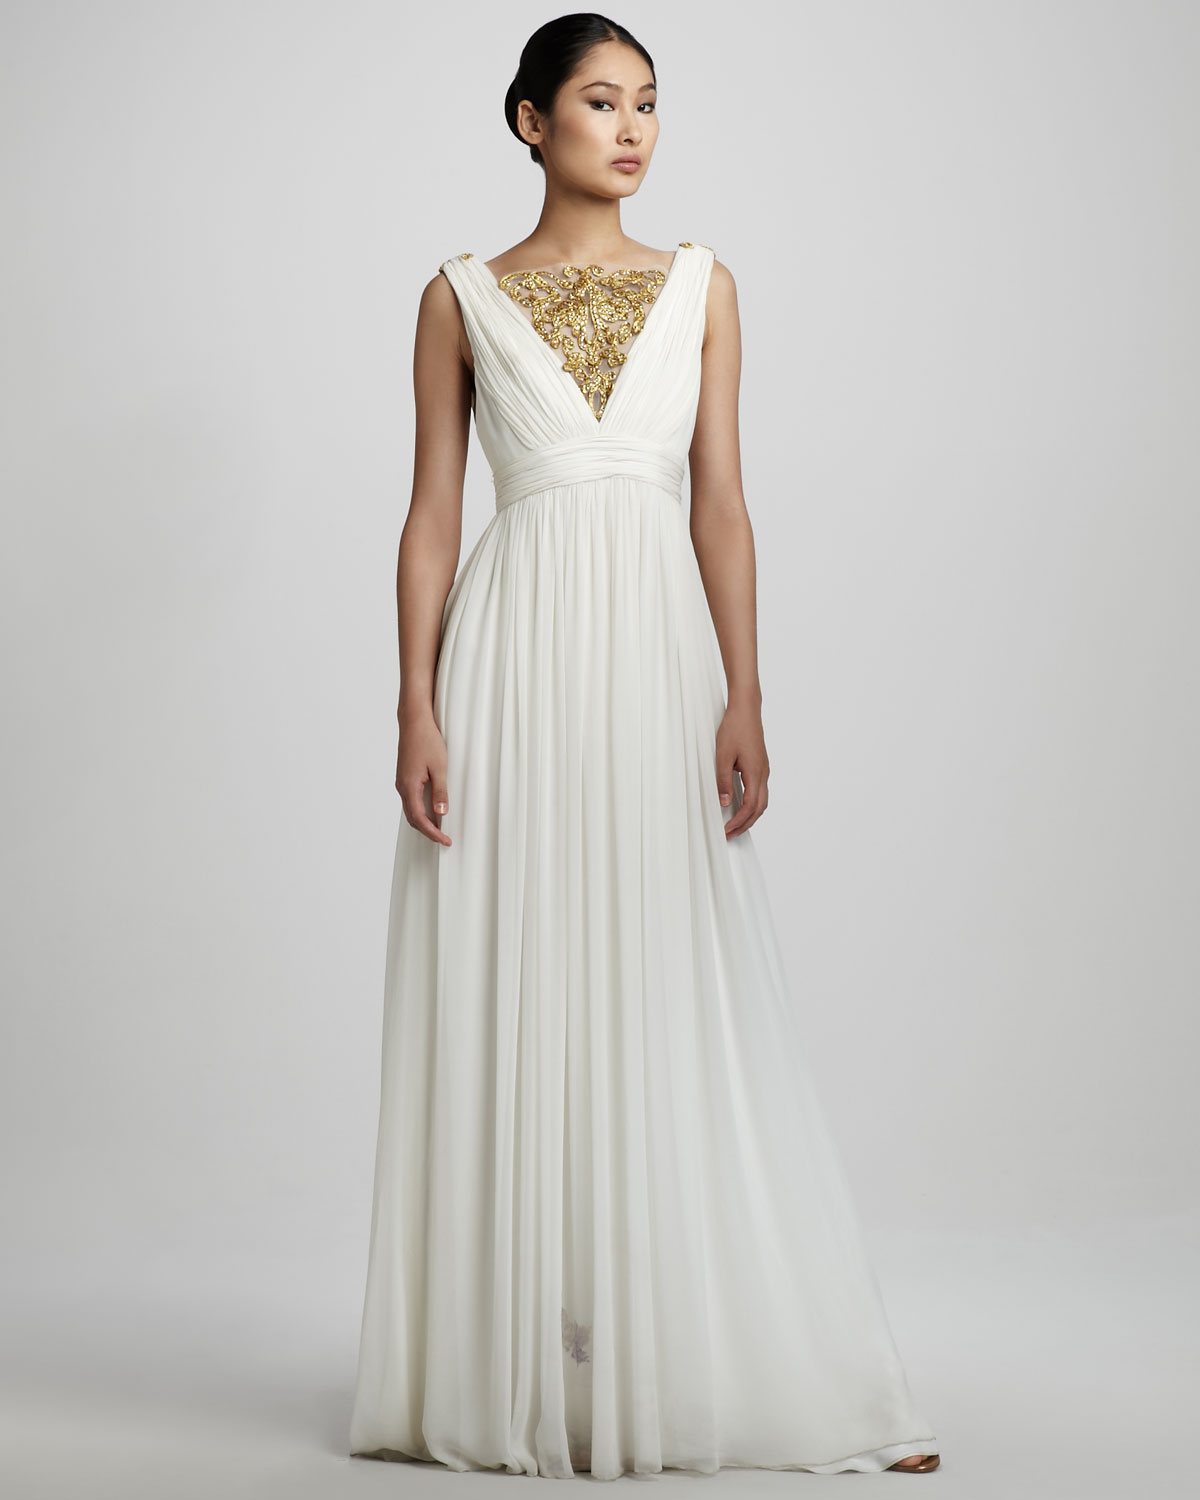 Notte by marchesa Embroidered Grecian Gown in White - Lyst